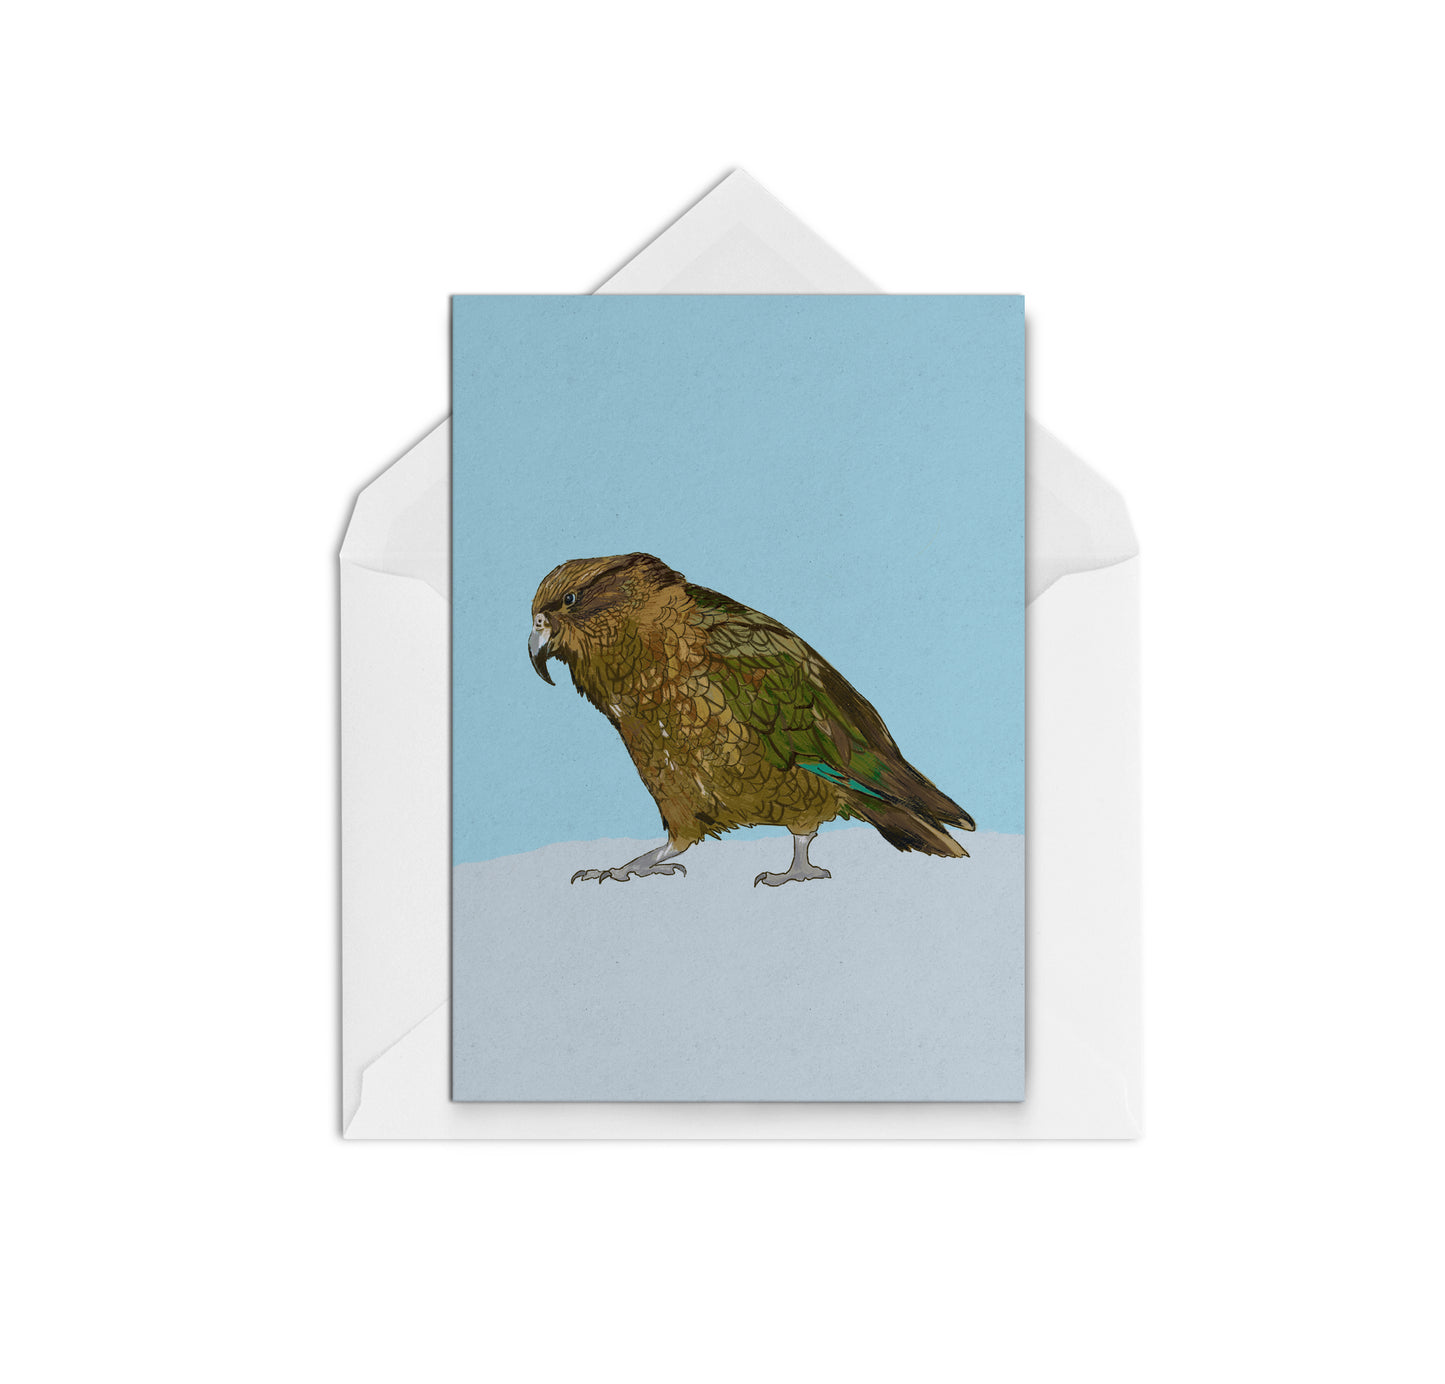 10 Everyday Flora & Fauna Cards - The Paper People Greeting Cards